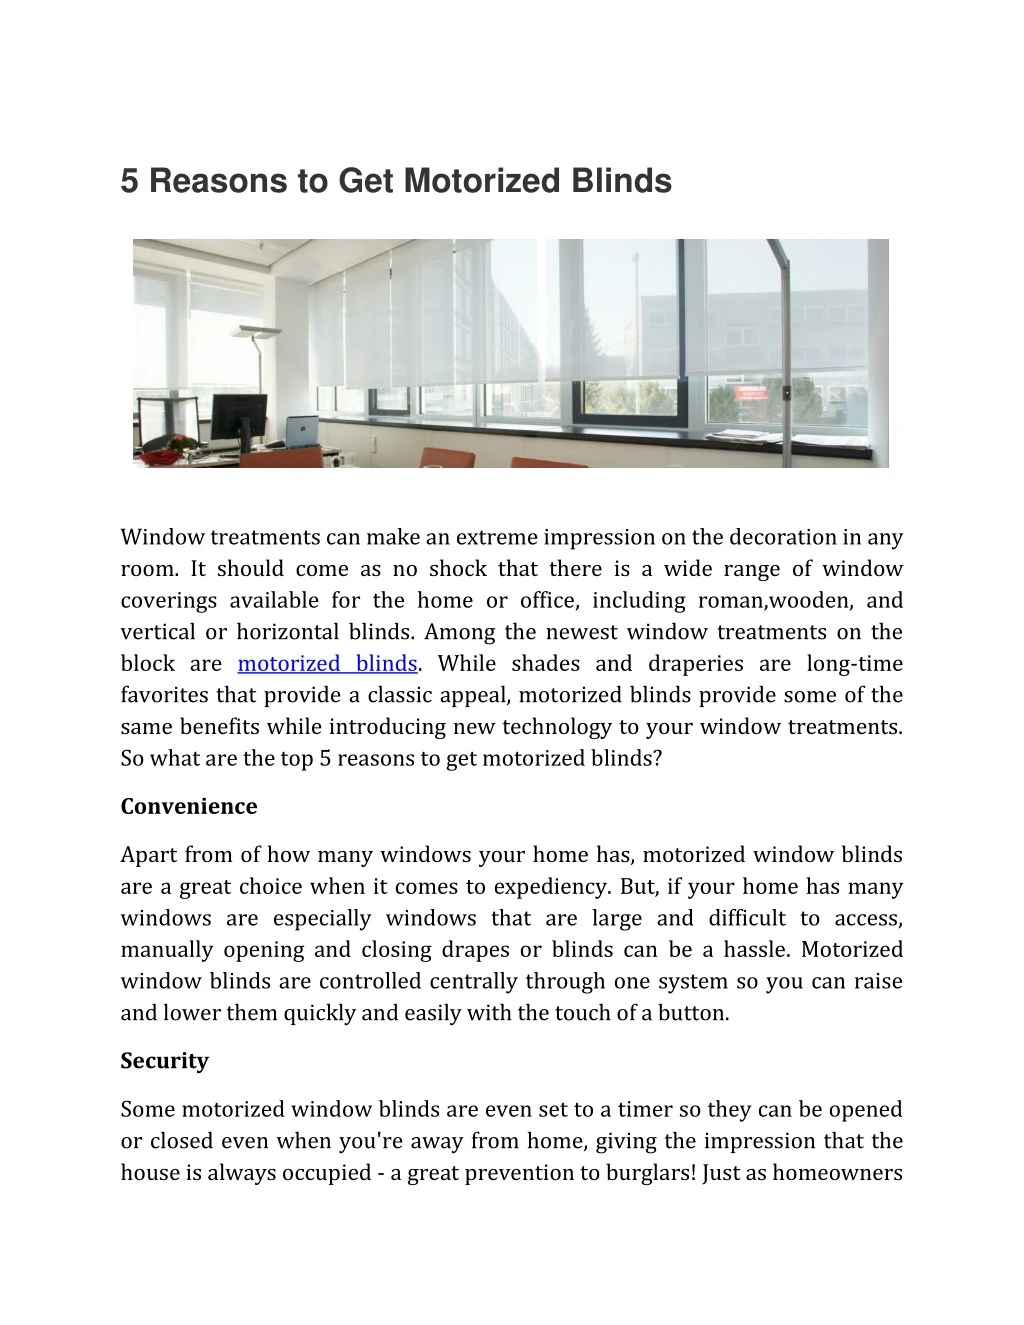 5 reasons to get motorized blinds